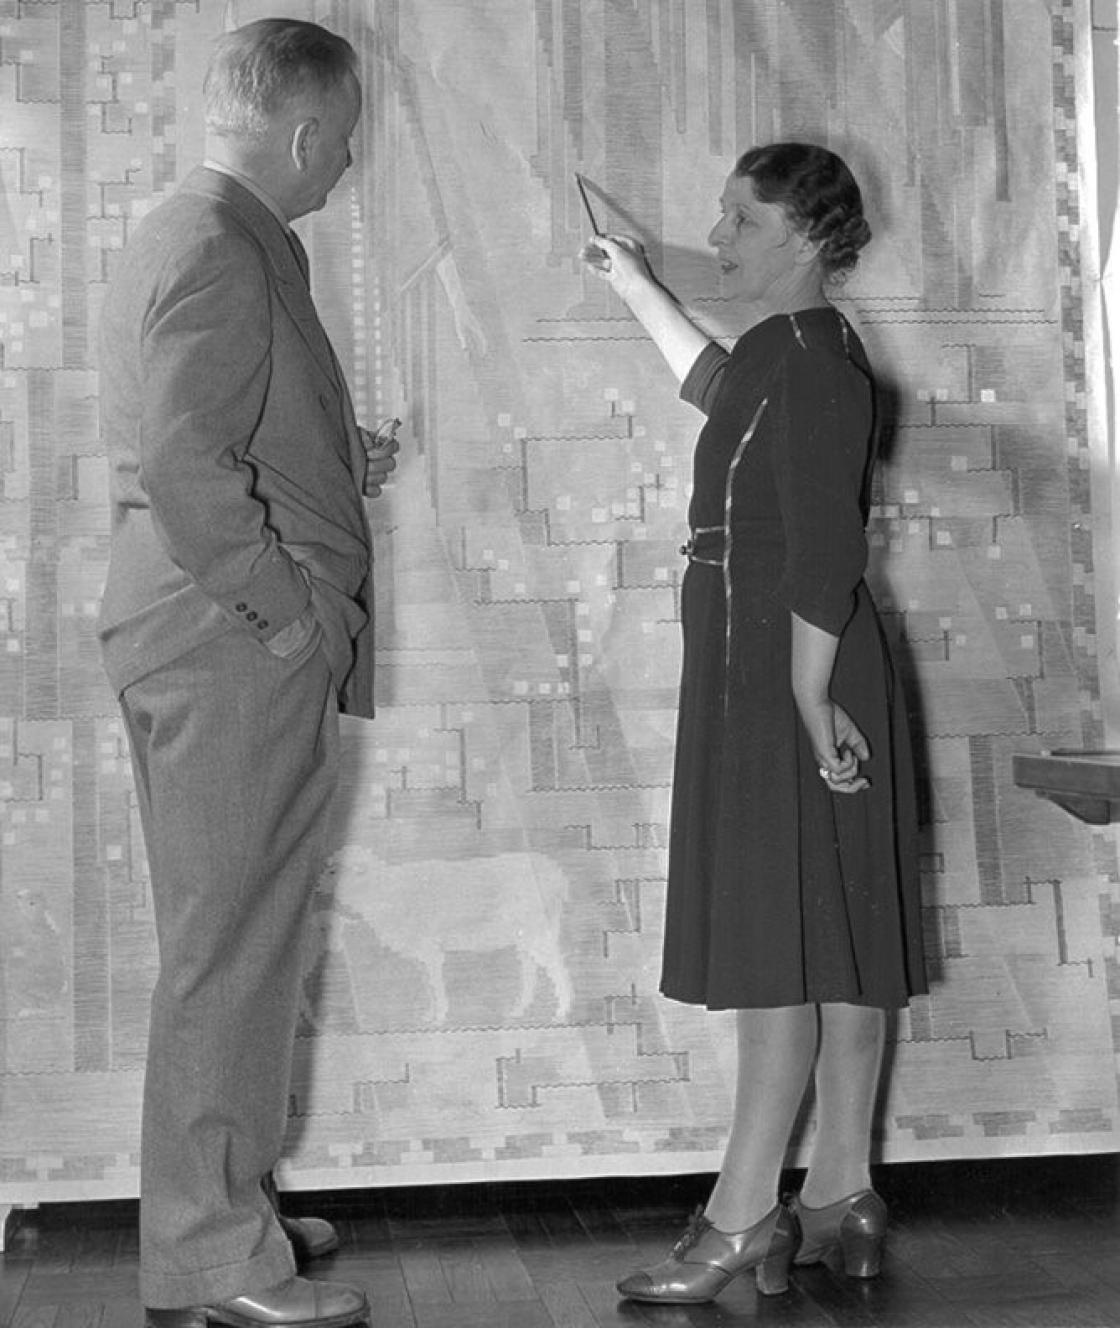 Photograph of Loja and Eliel Saarinen at a tapestry